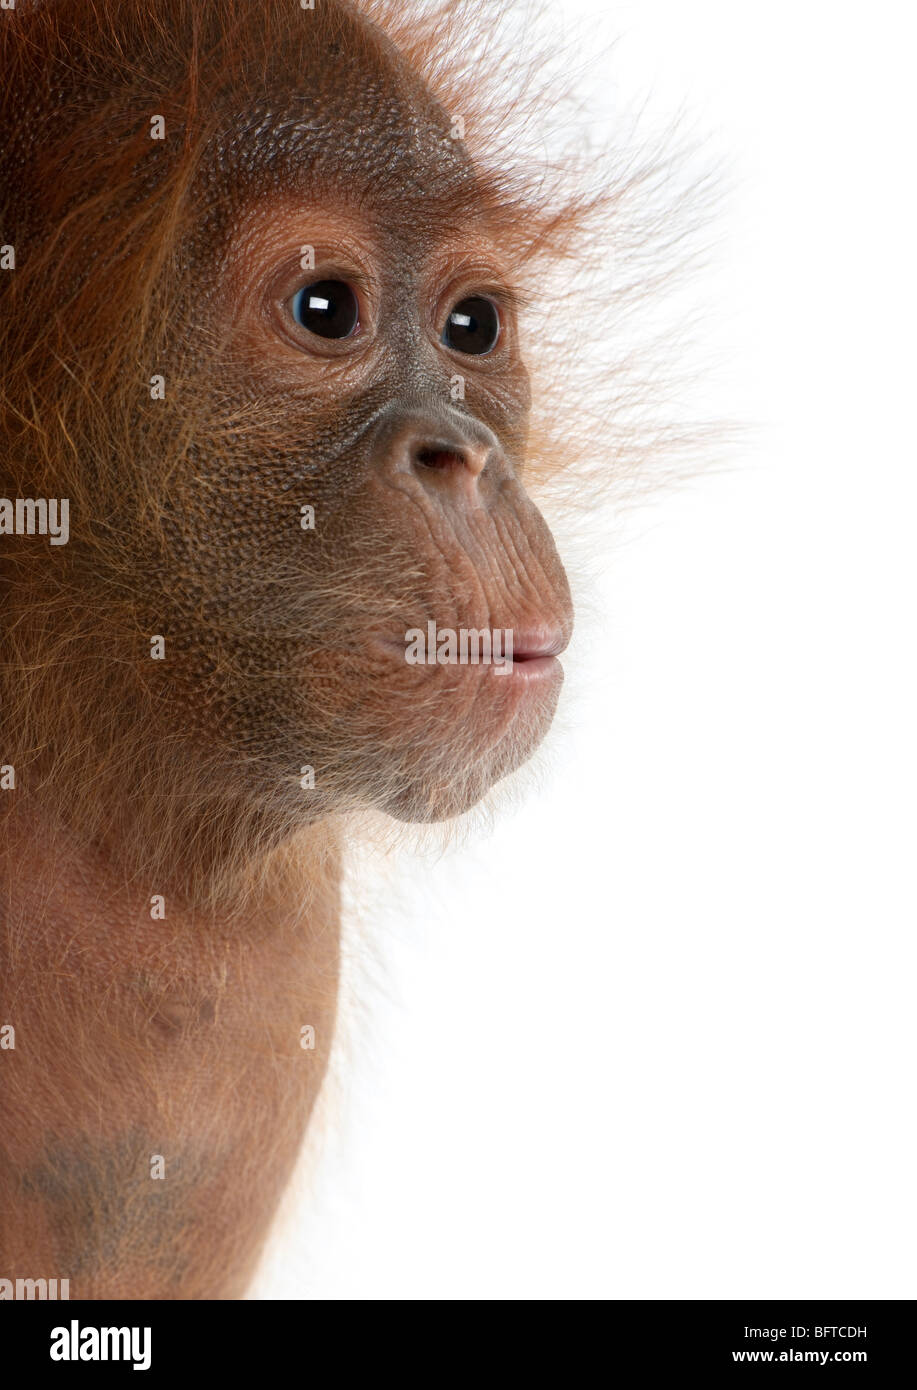 Close-up of baby, orang-outan de Sumatra 4 mois, in front of white background Banque D'Images